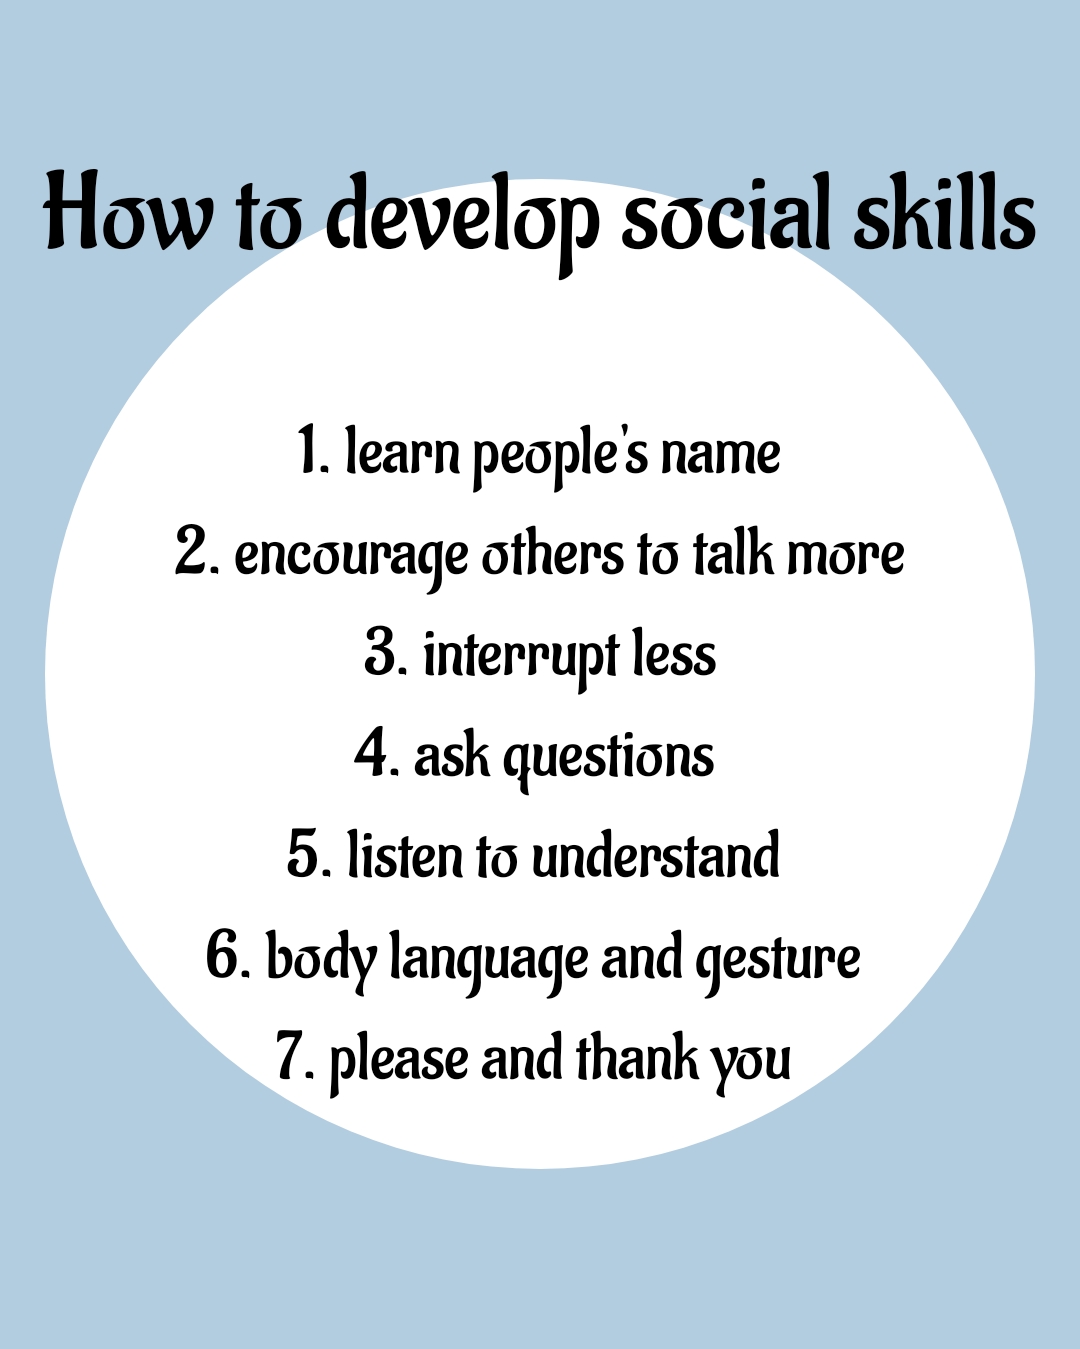 How to develop social skills